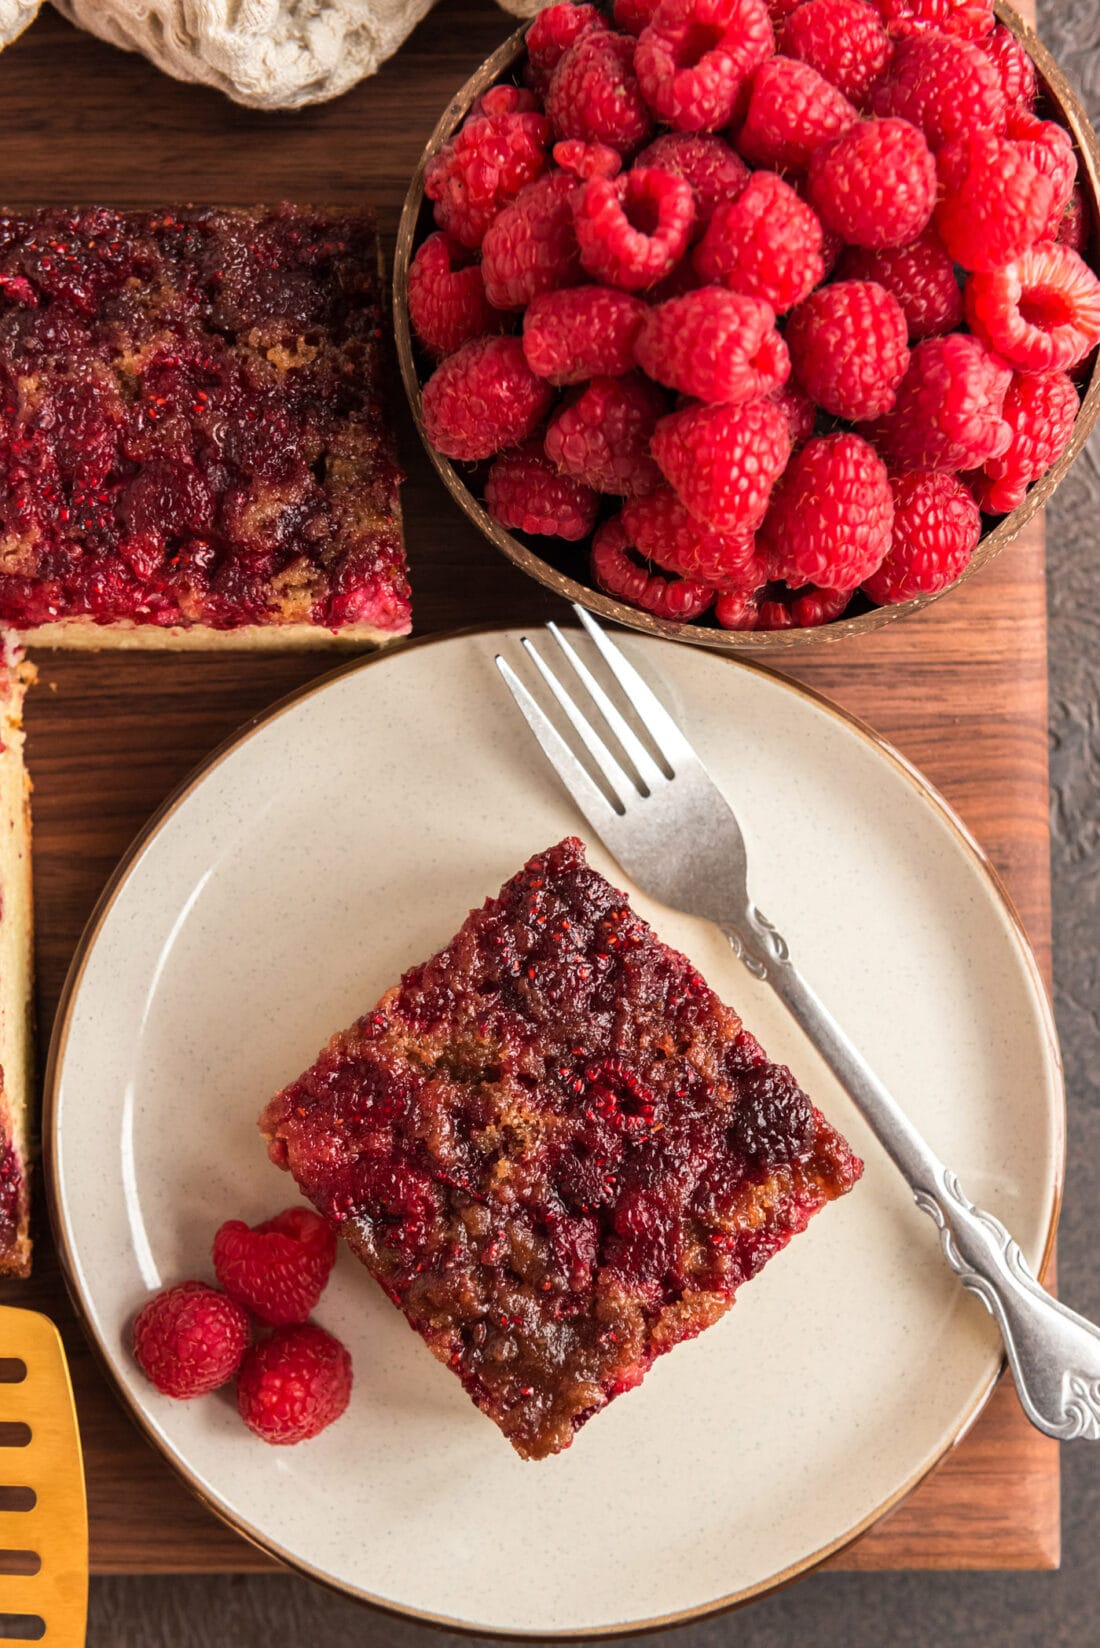 Square of Raspberry Upside Down Cake on a plate with a bowl of raspberries next to it